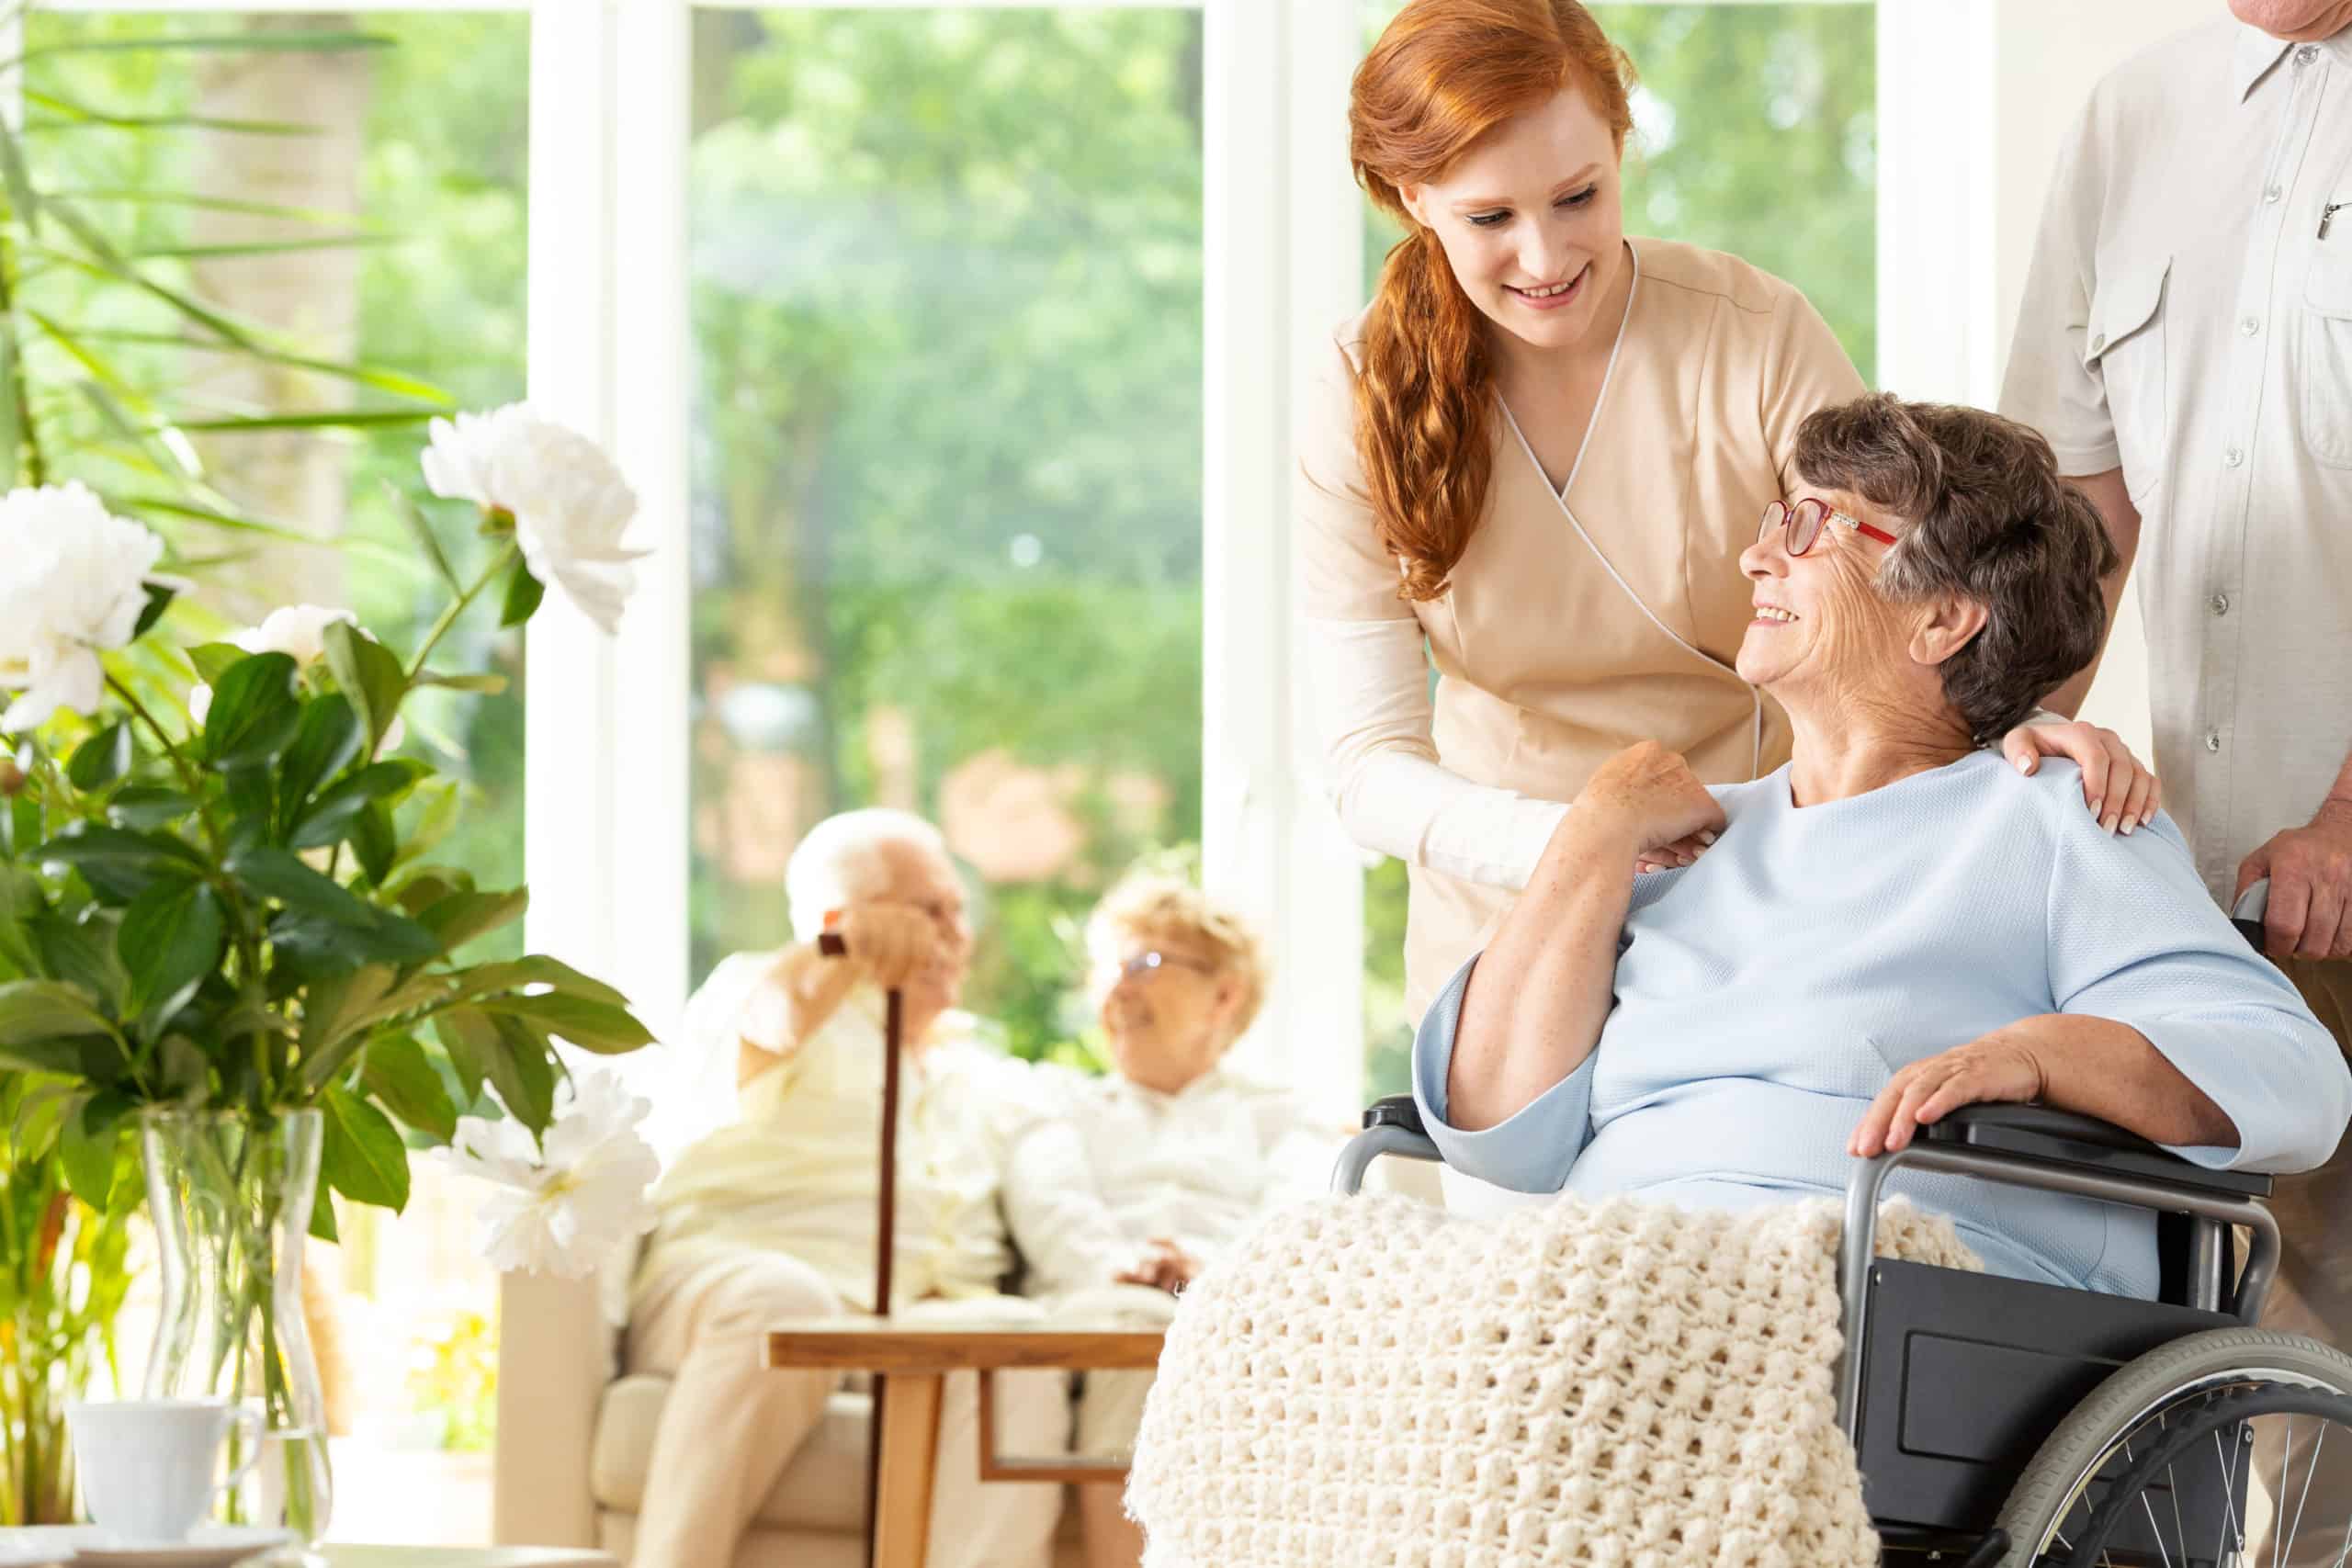 Senior Care Facilities Saves in Multiple Cost Centers - Expense To Profit